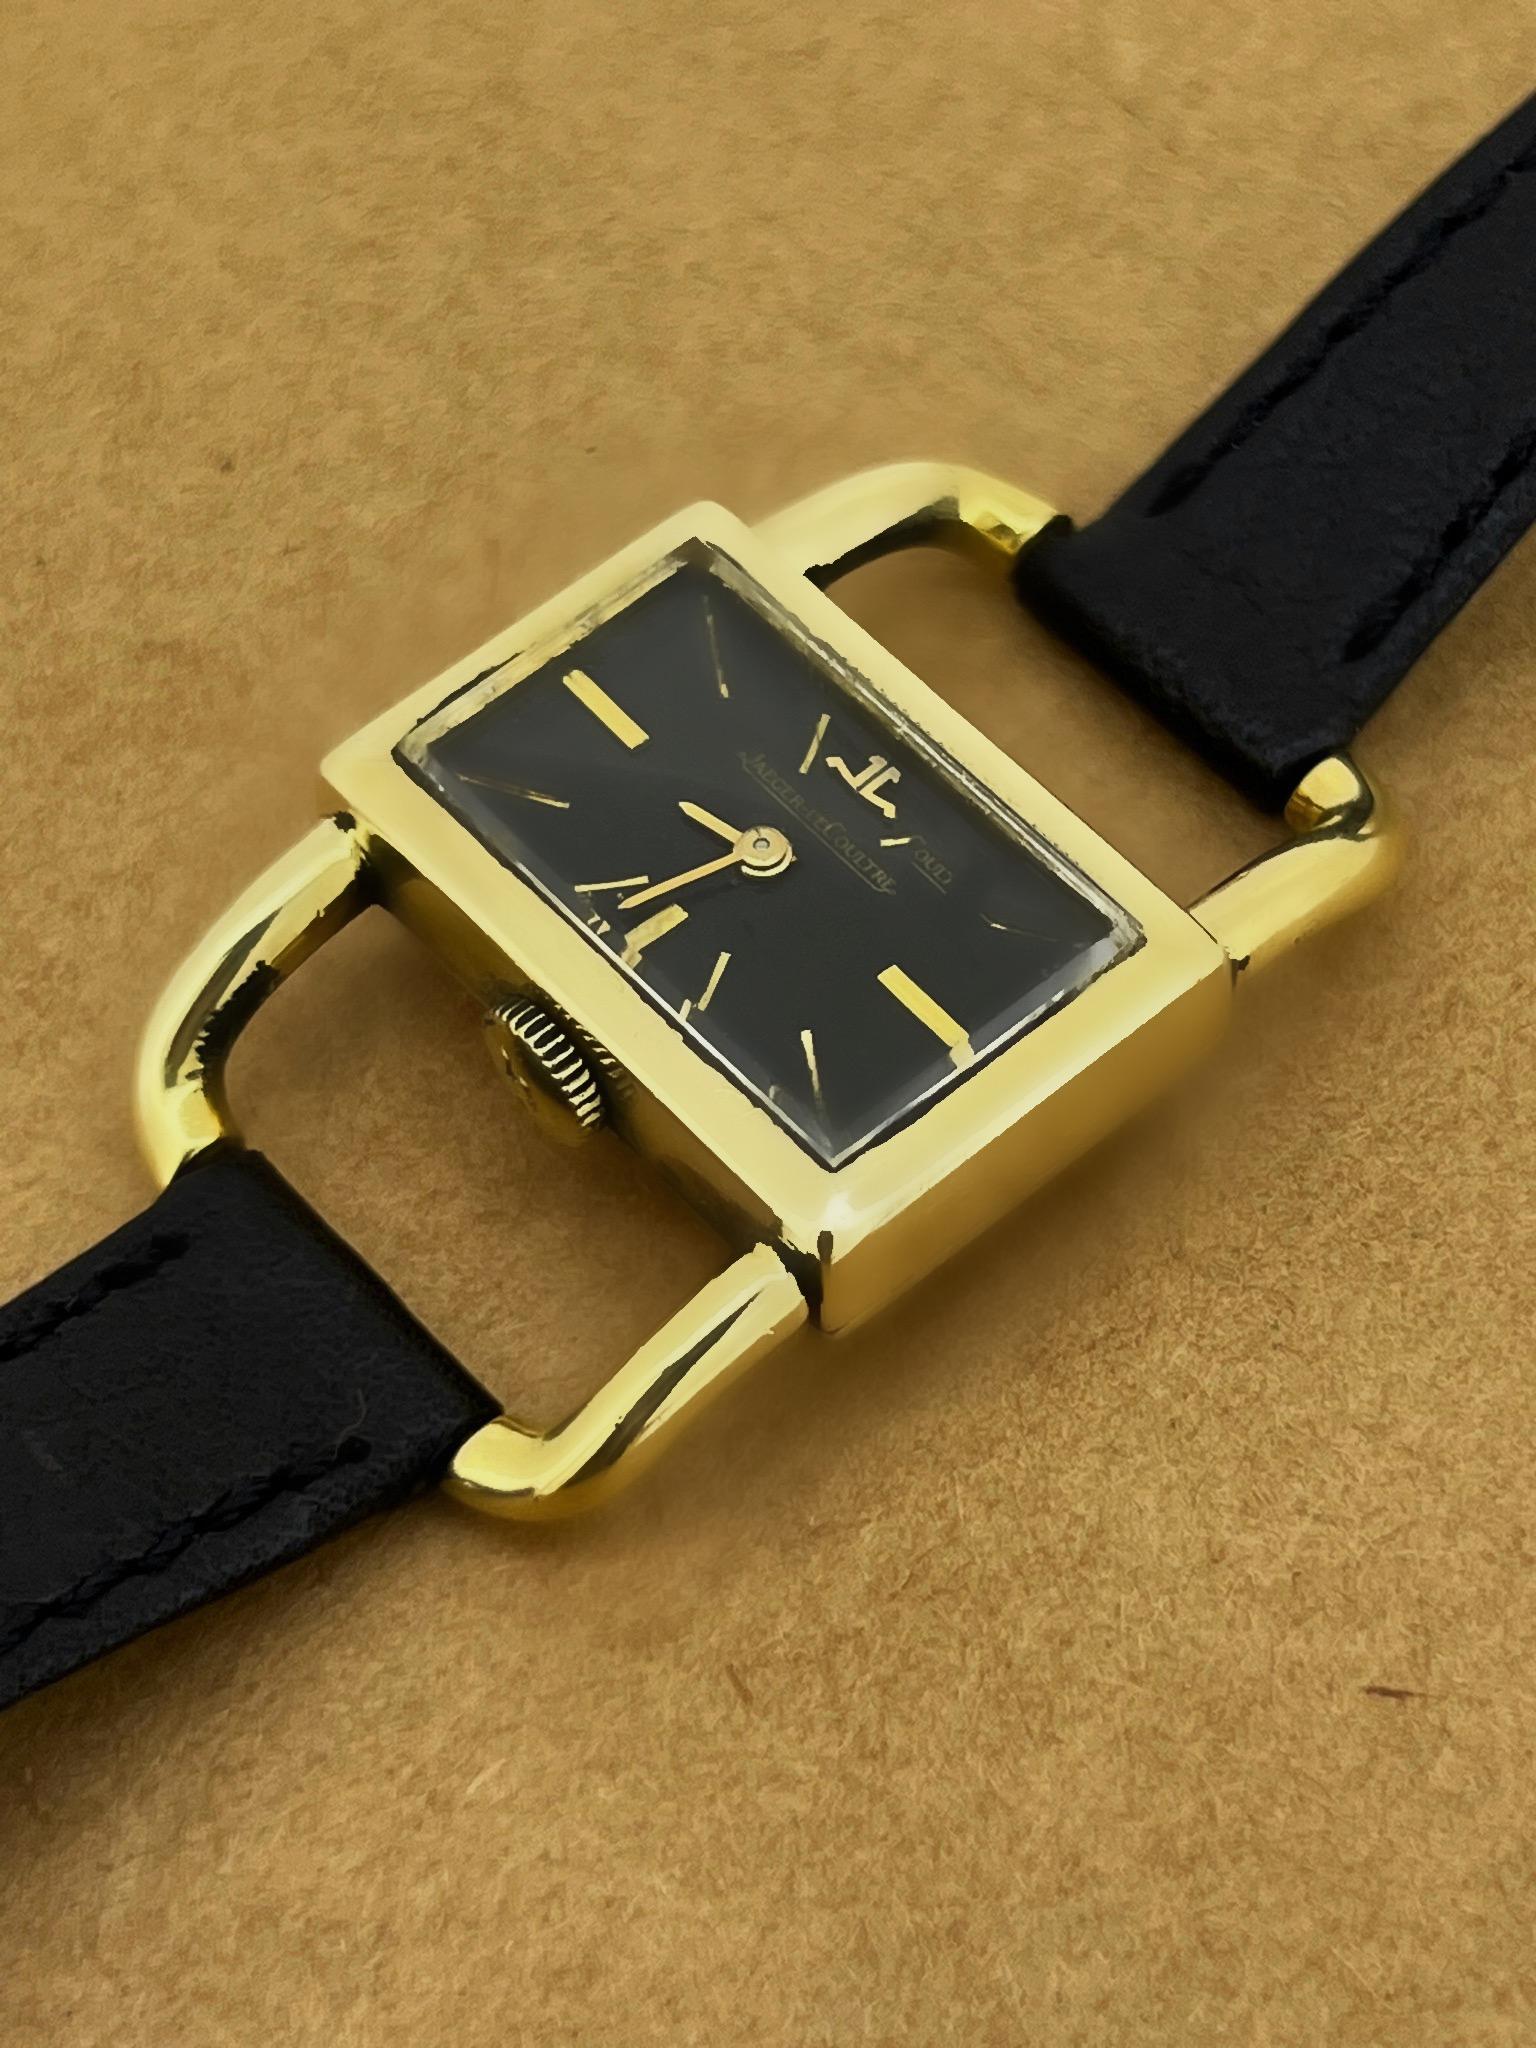 Jaeger-LeCoultre Értier Luchetto 18K Gold, Onyx Dial, Stirrup Lugs Ladies Watch For Sale 2